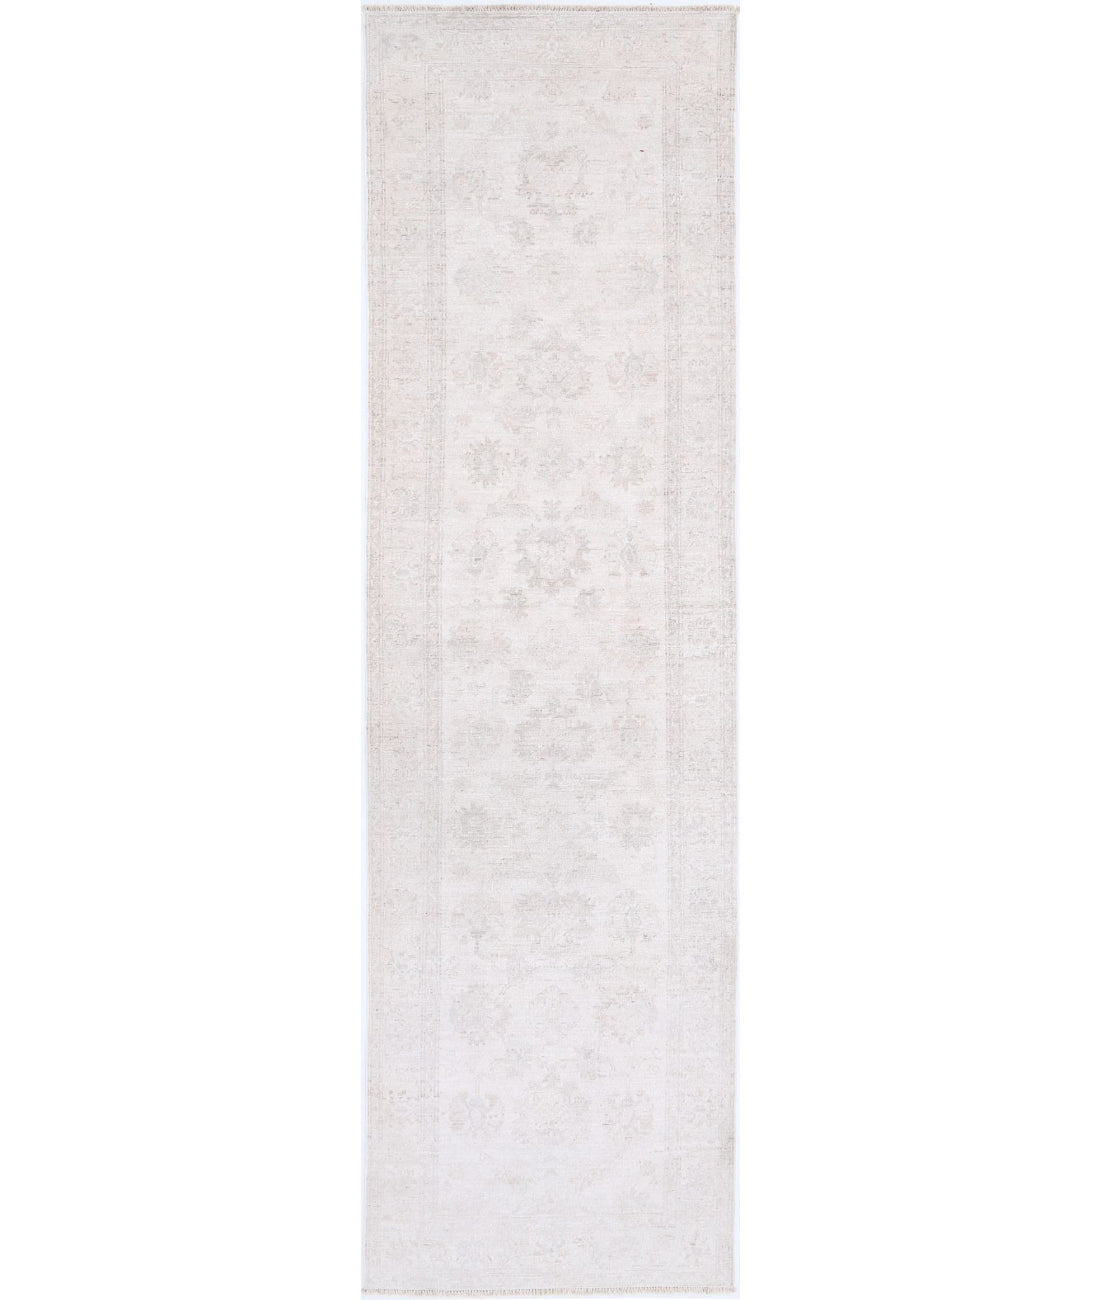 Hand Knotted Serenity Wool Rug - 2'6'' x 9'9'' 2'6'' x 9'9'' (75 X 293) / Ivory / Taupe